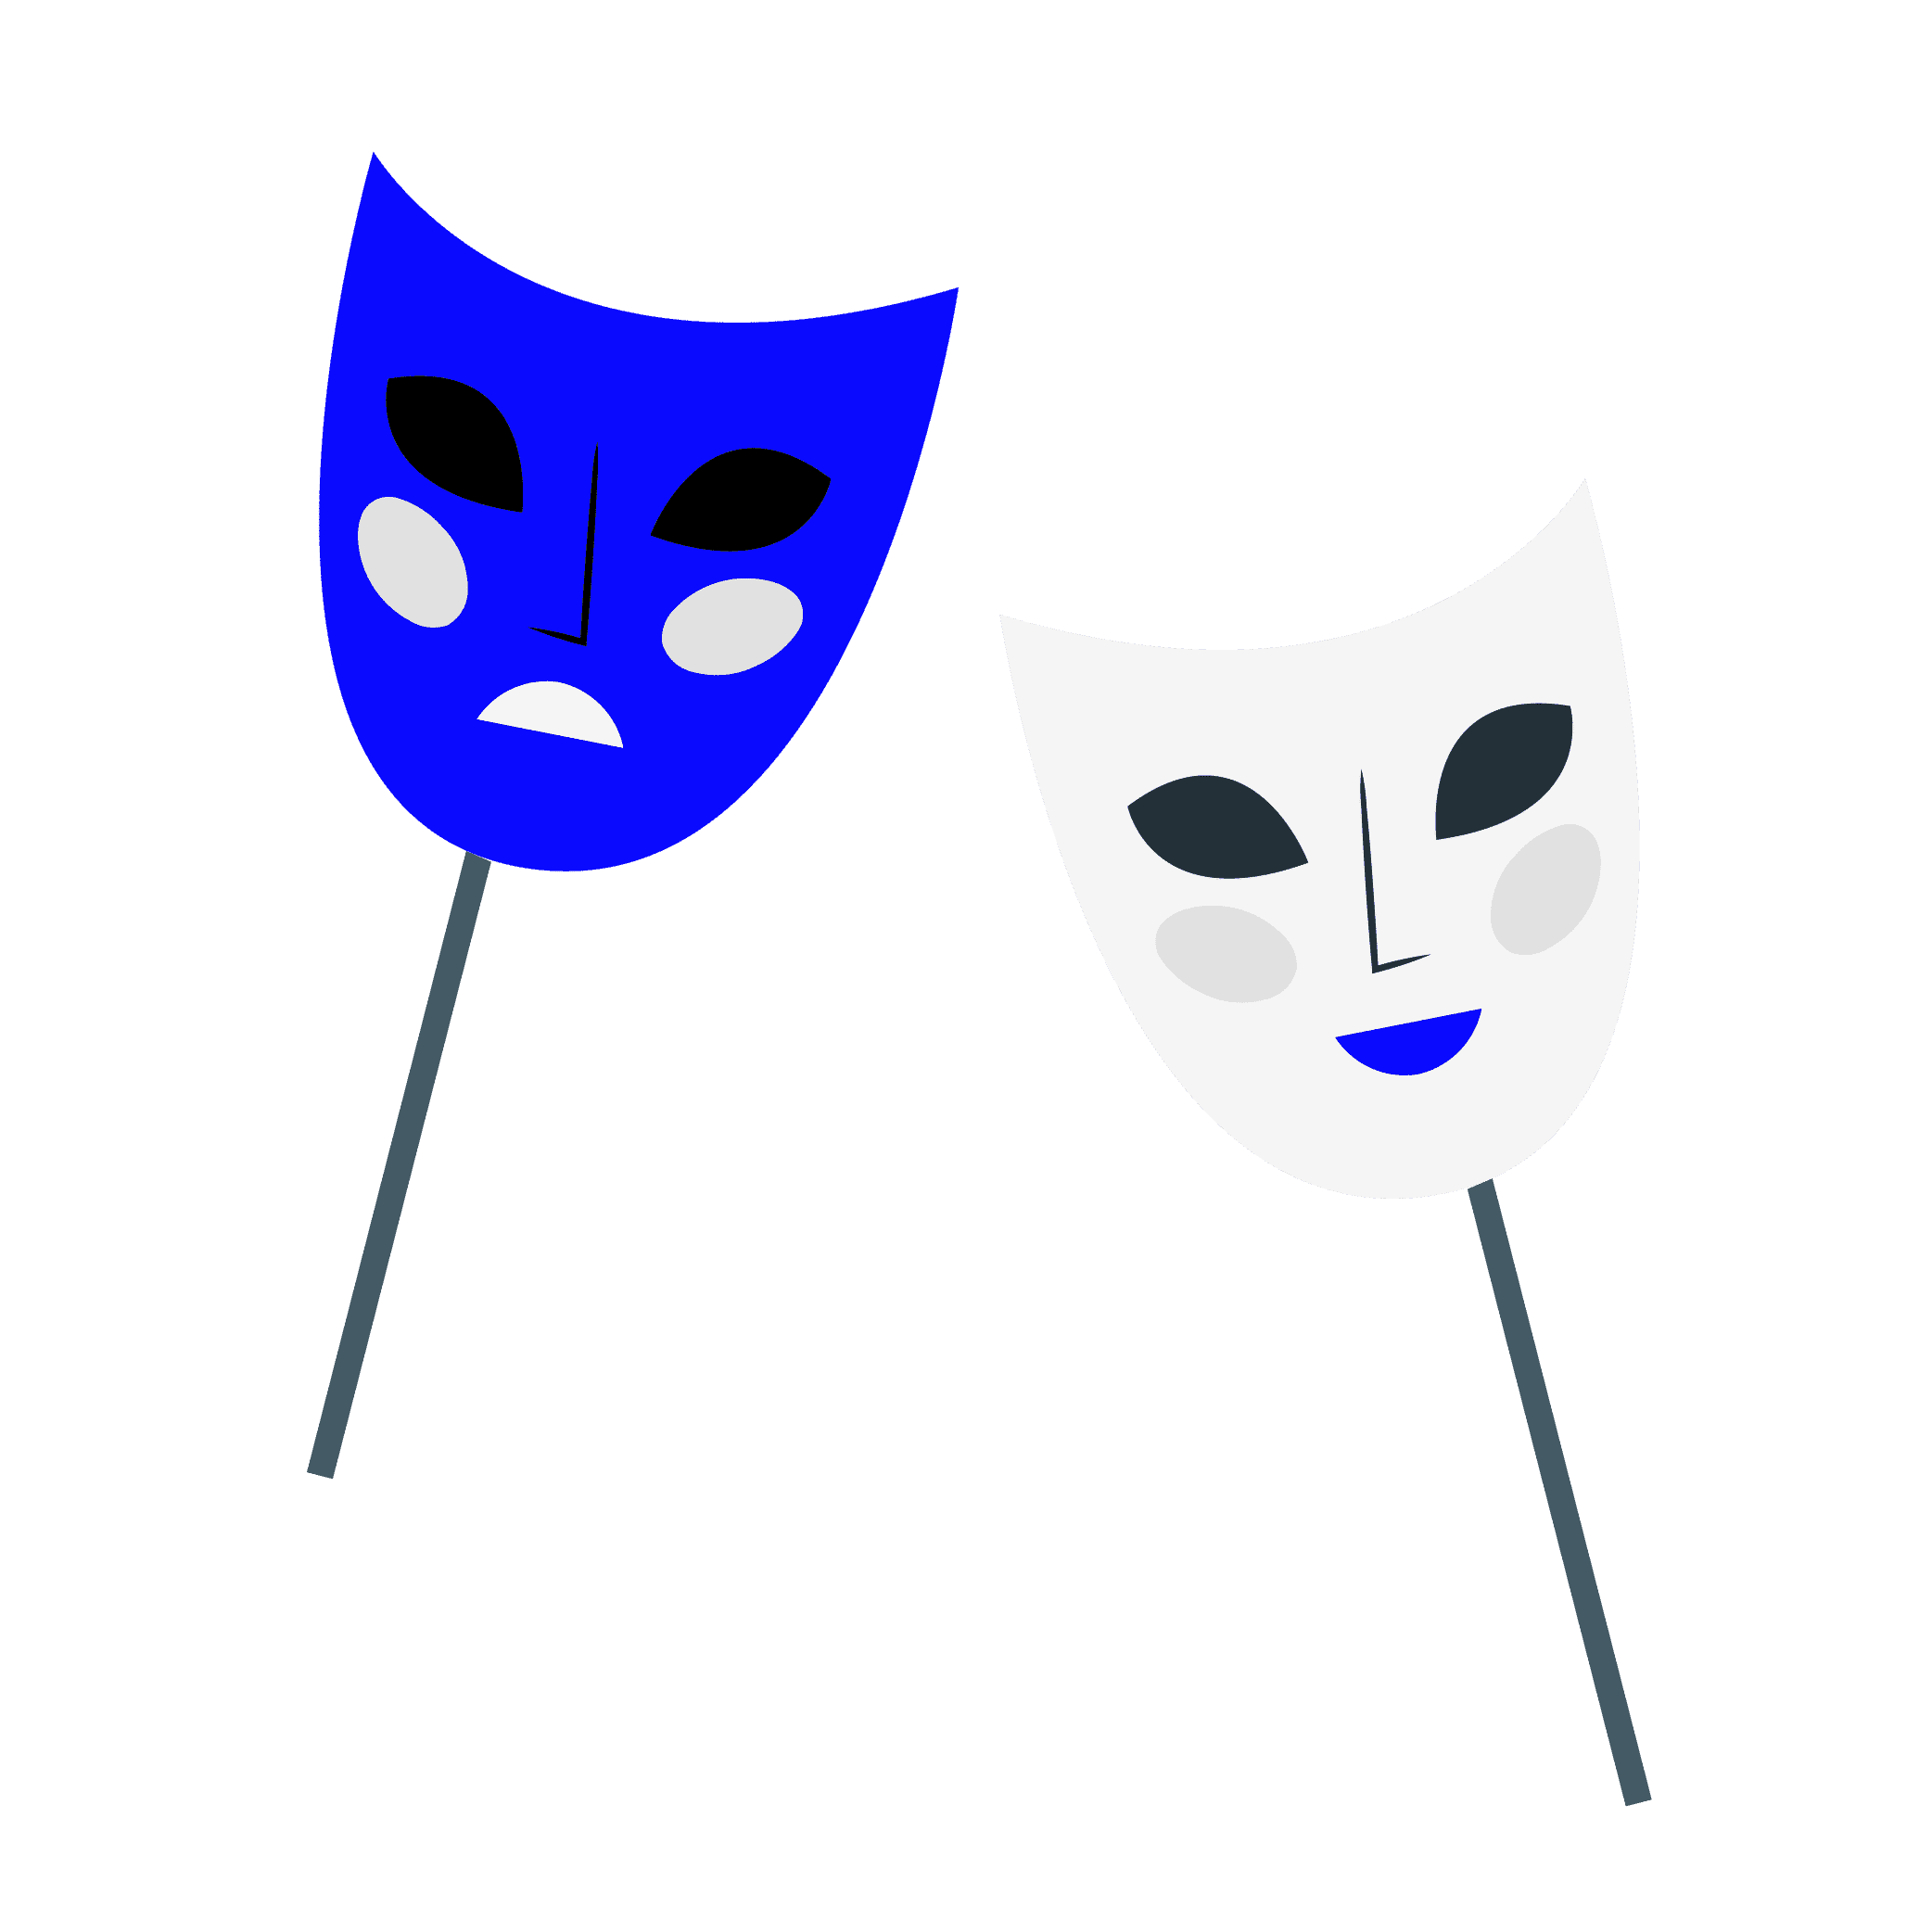 two theater masks, one sad blue mask and one happy white mask